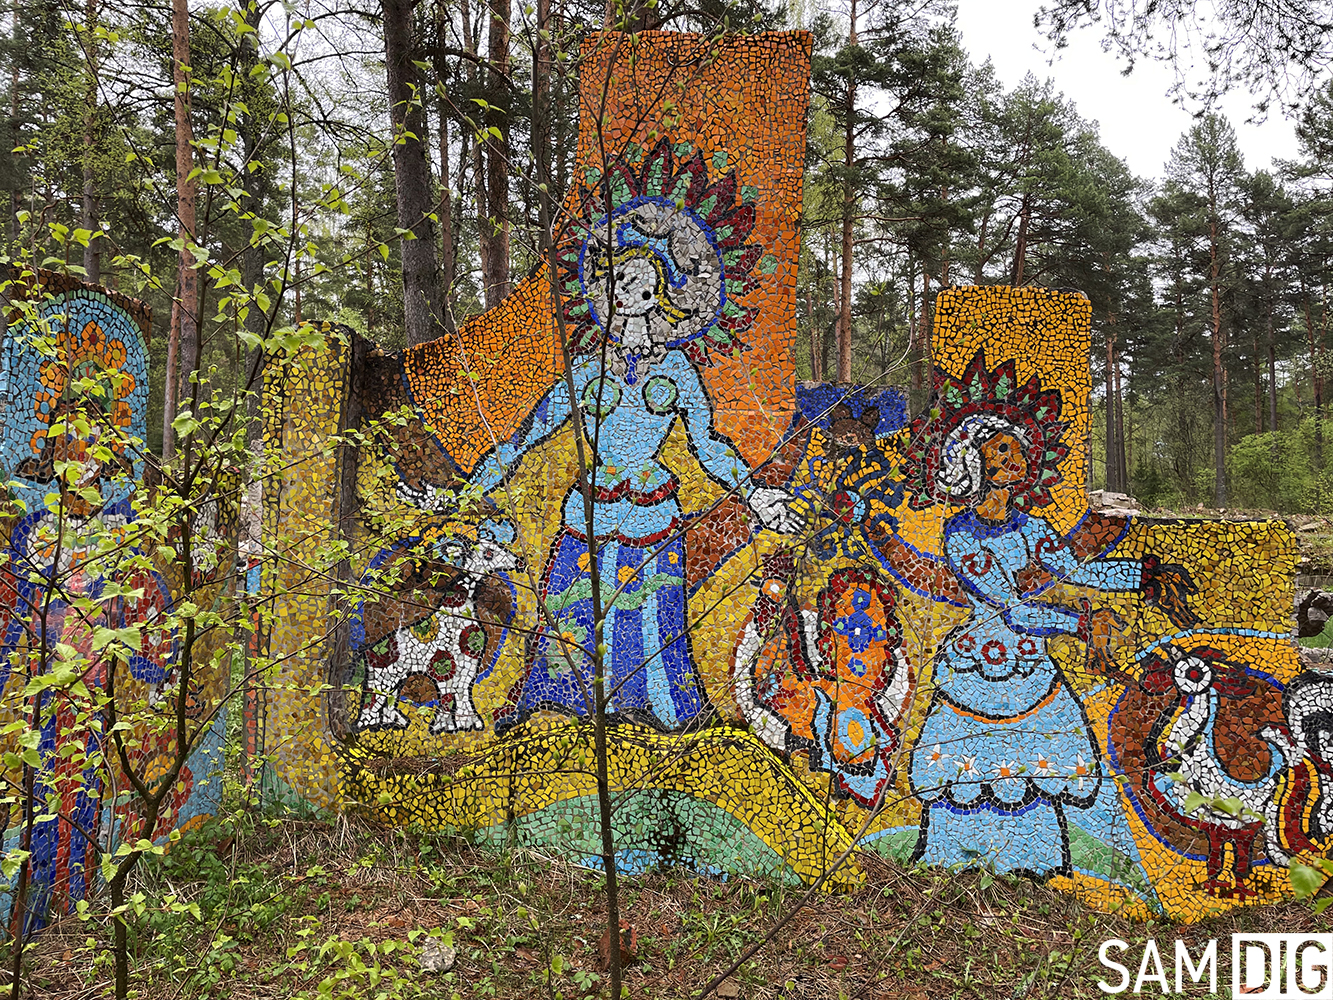 The remains of the Soviet mosaic pioneer camp Friendship - My, Abandoned, Travel across Russia, sights, Made in USSR, Architecture, Mosaic, Urbanfact, Urbanphoto, Soviet, Childhood in the USSR, the USSR, Cast, Longpost